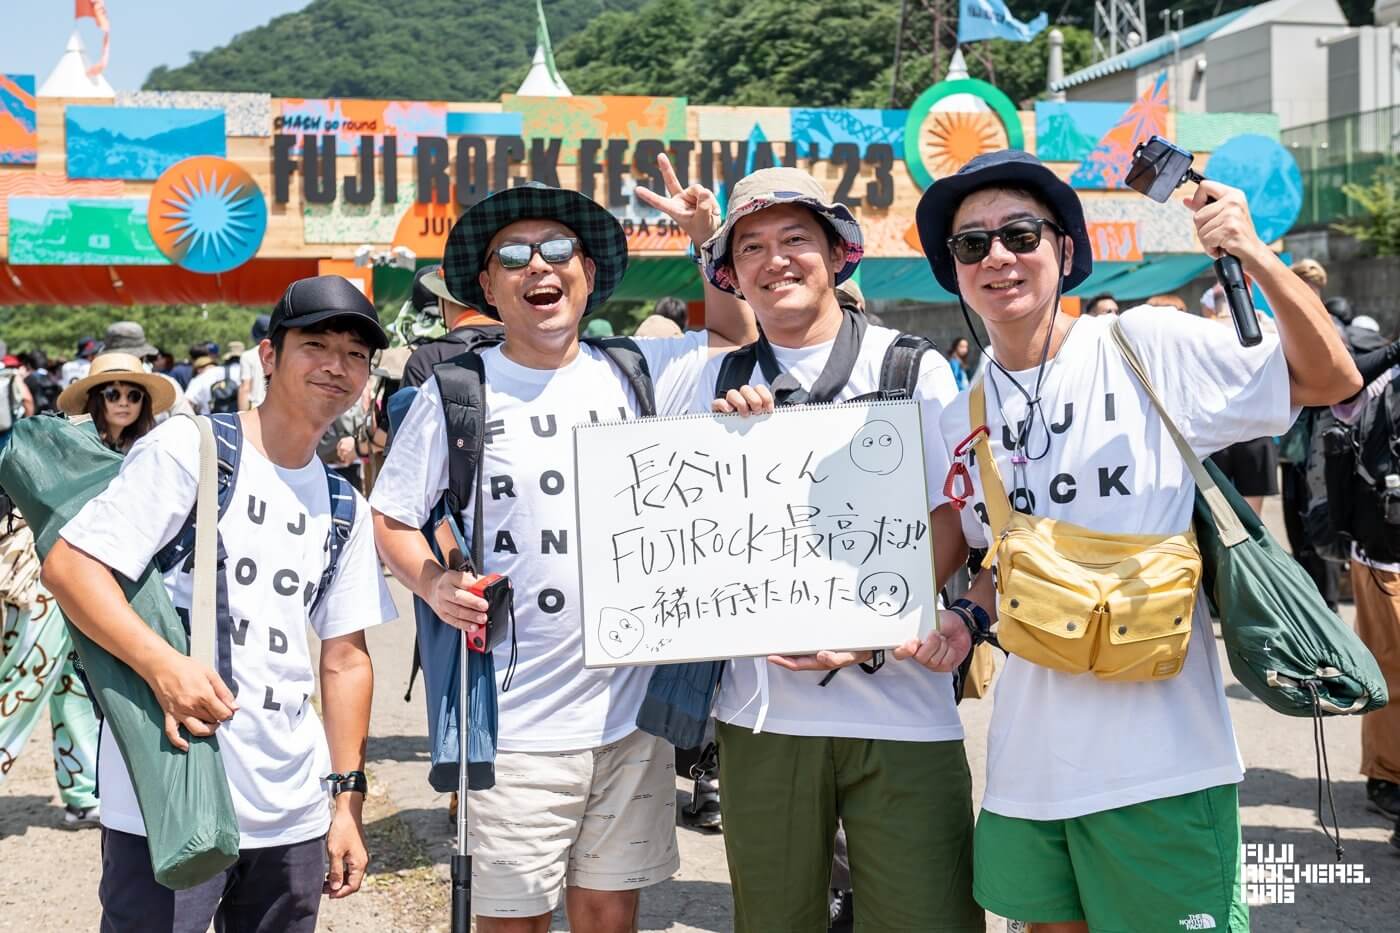 Message for FUJI ROCK! #01